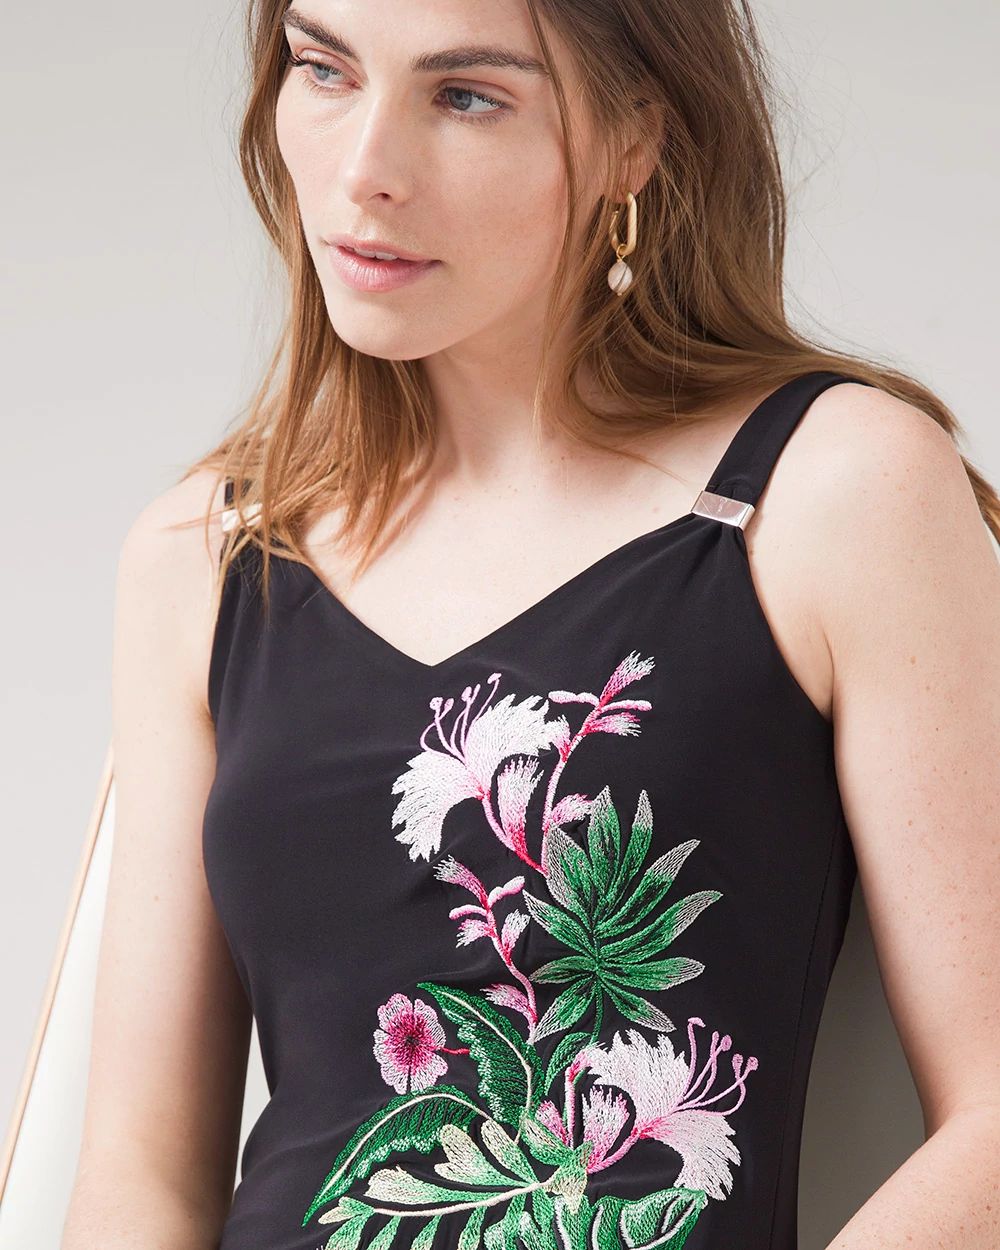 Embroidered Matte Jersey Tank Dress click to view larger image.